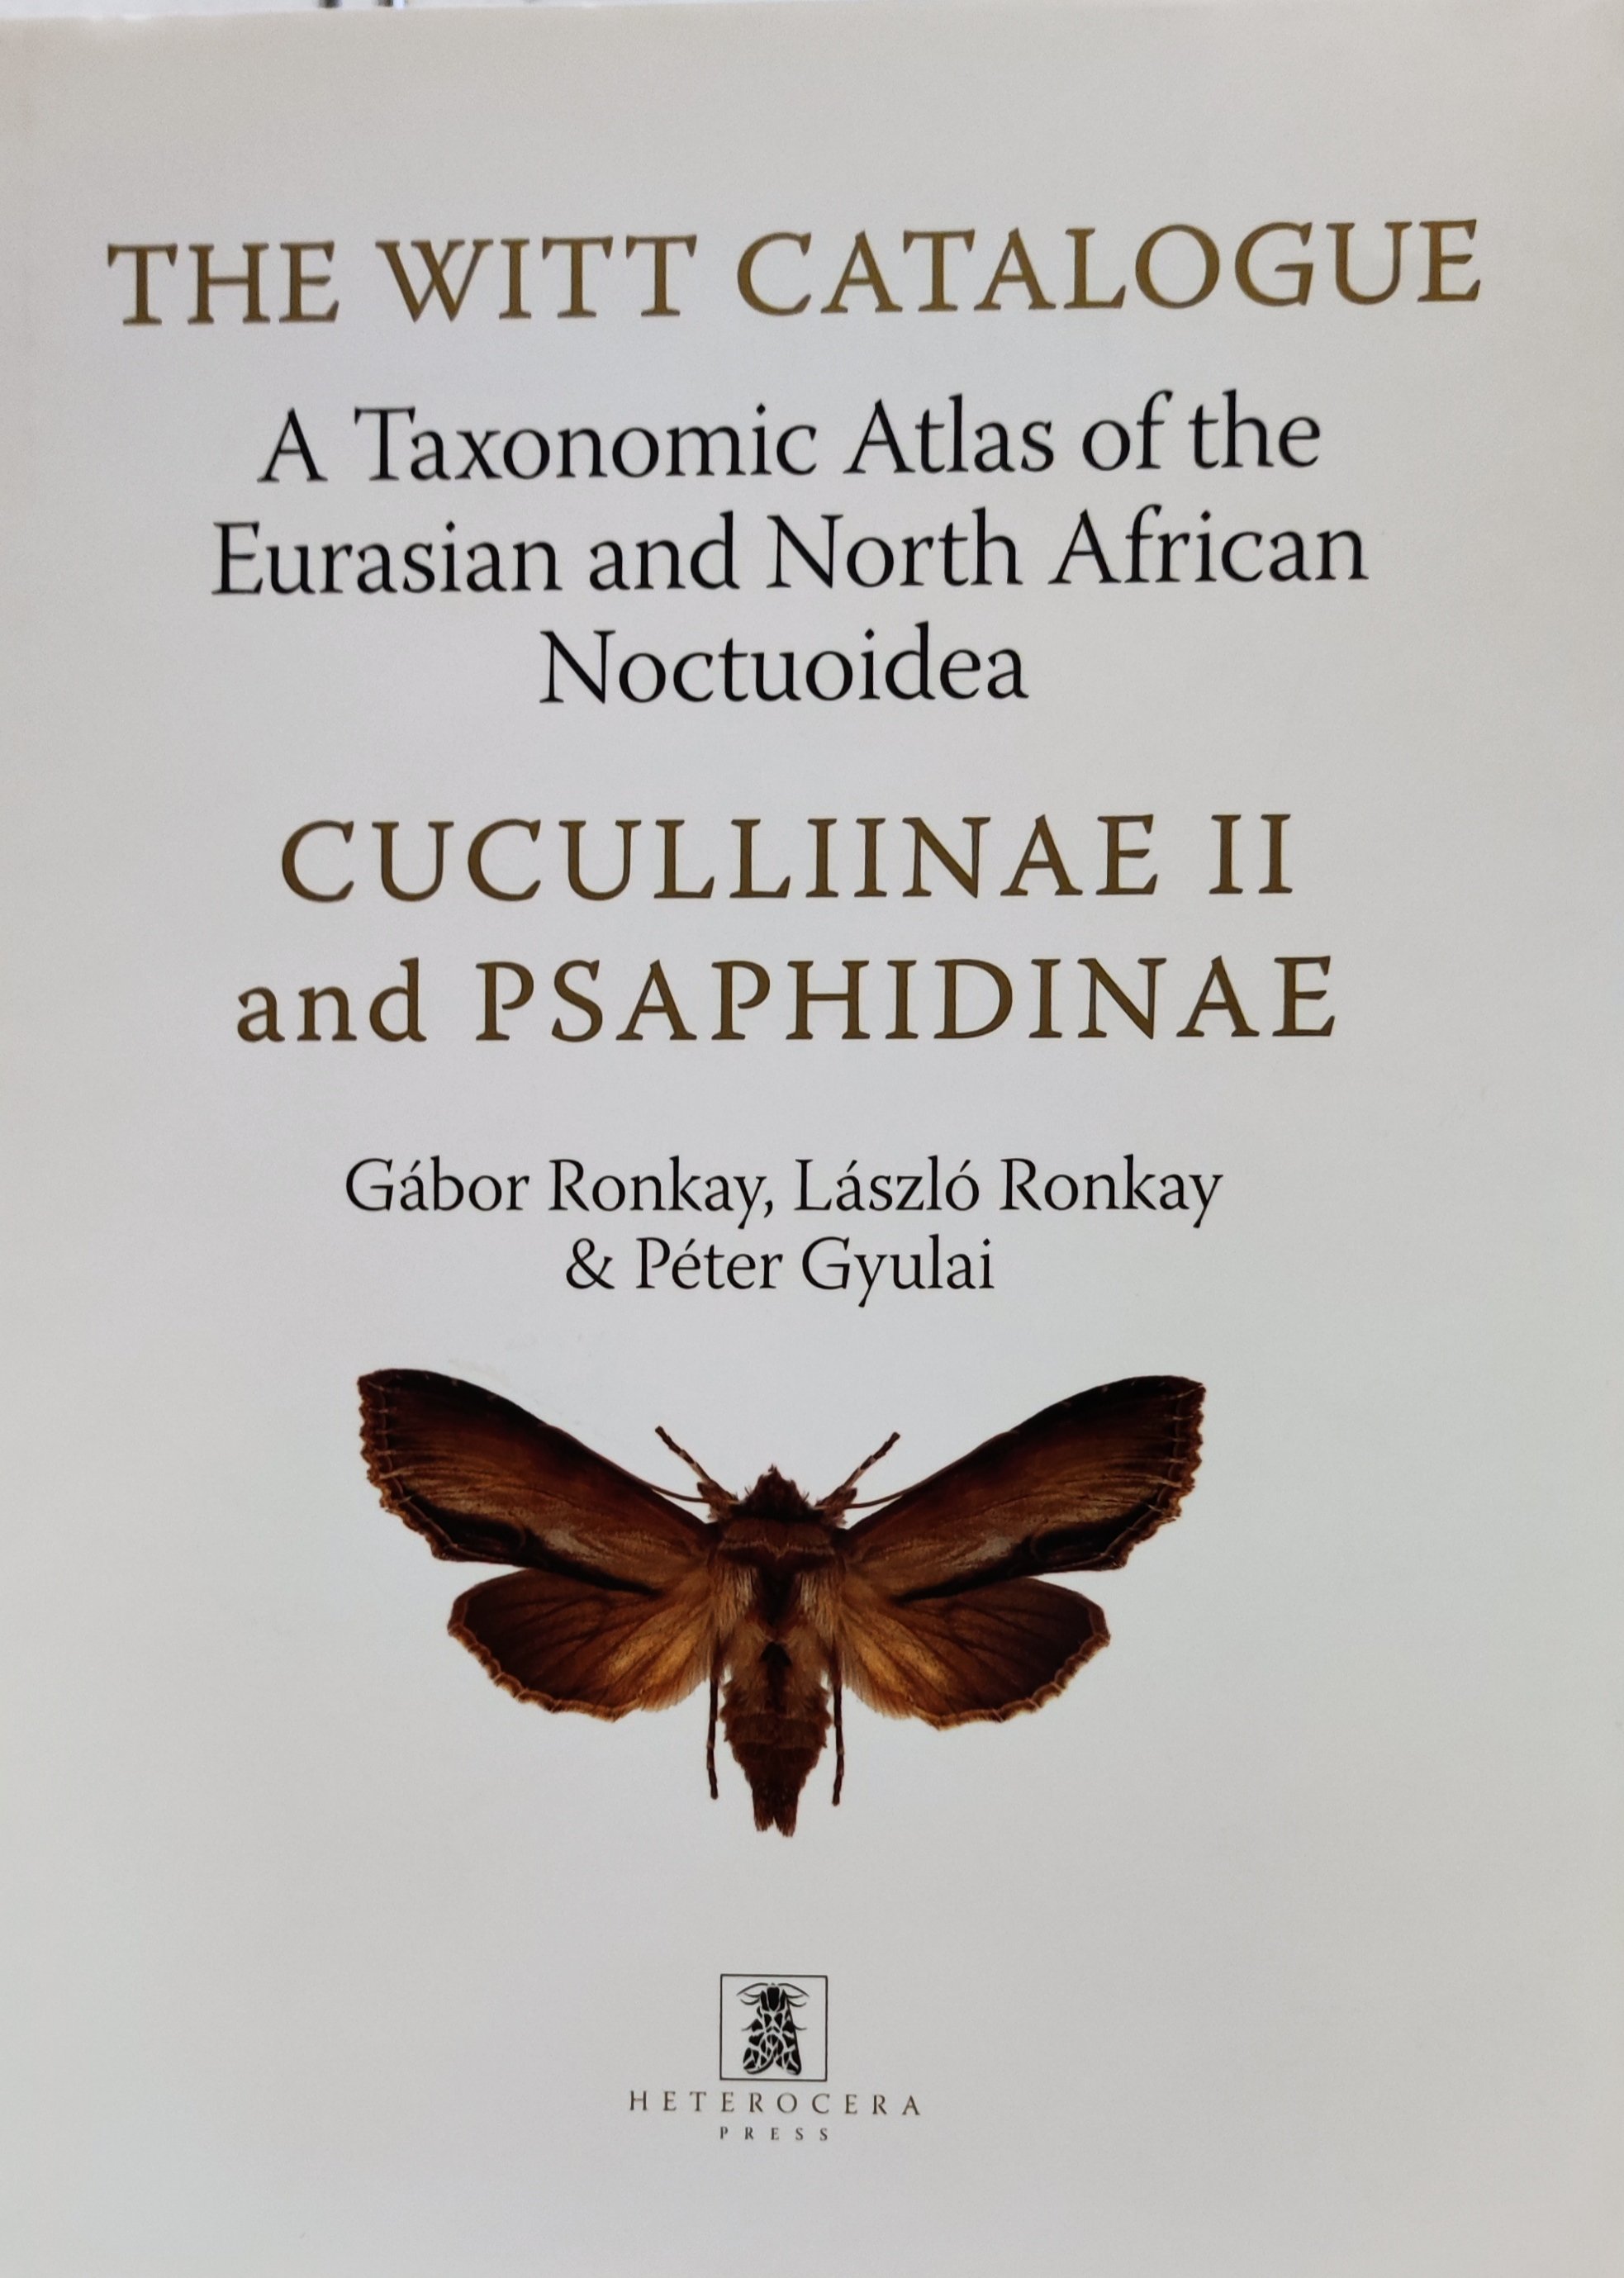 The Witt Catalogue: A Taxonomic Atlas of the Eurasian and North African Noctuoidea. volume 5. - Cuculliinae 2. and Psaphidinae (Rippl-Rónai Múzeum CC BY-NC-ND)